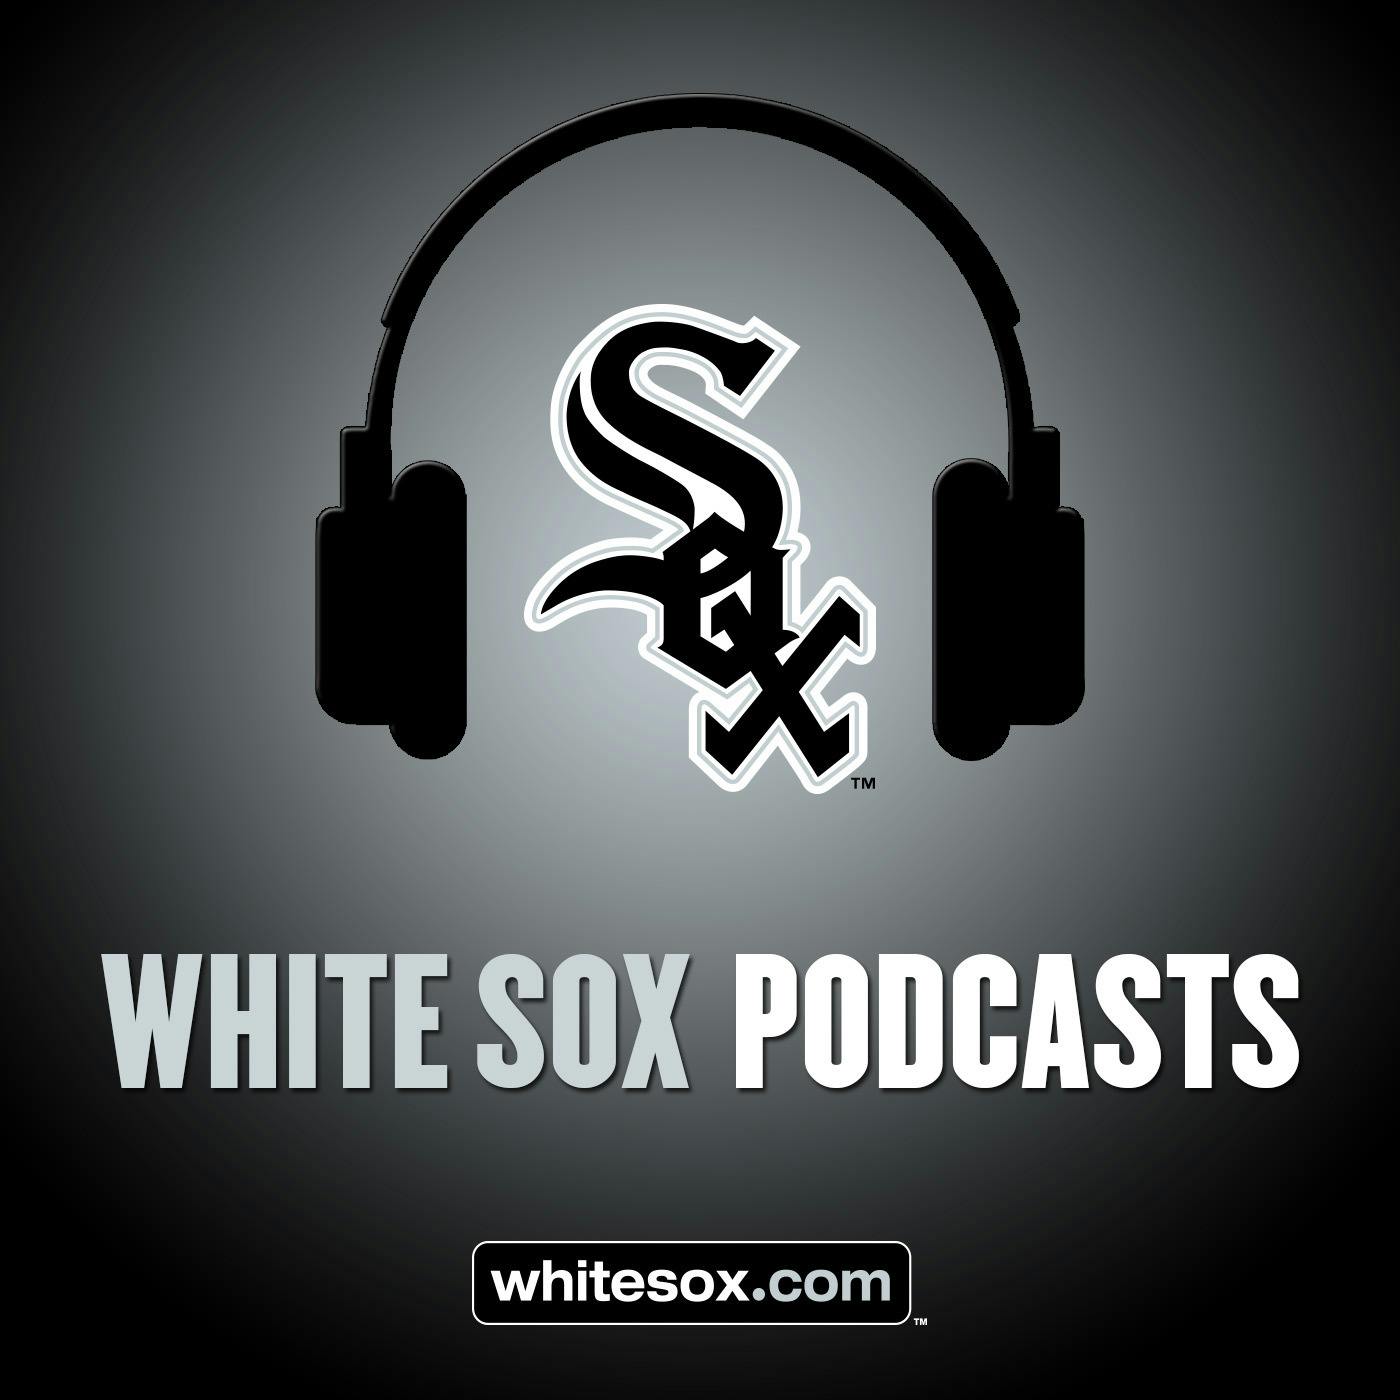 1/5/19: White Sox Weekly